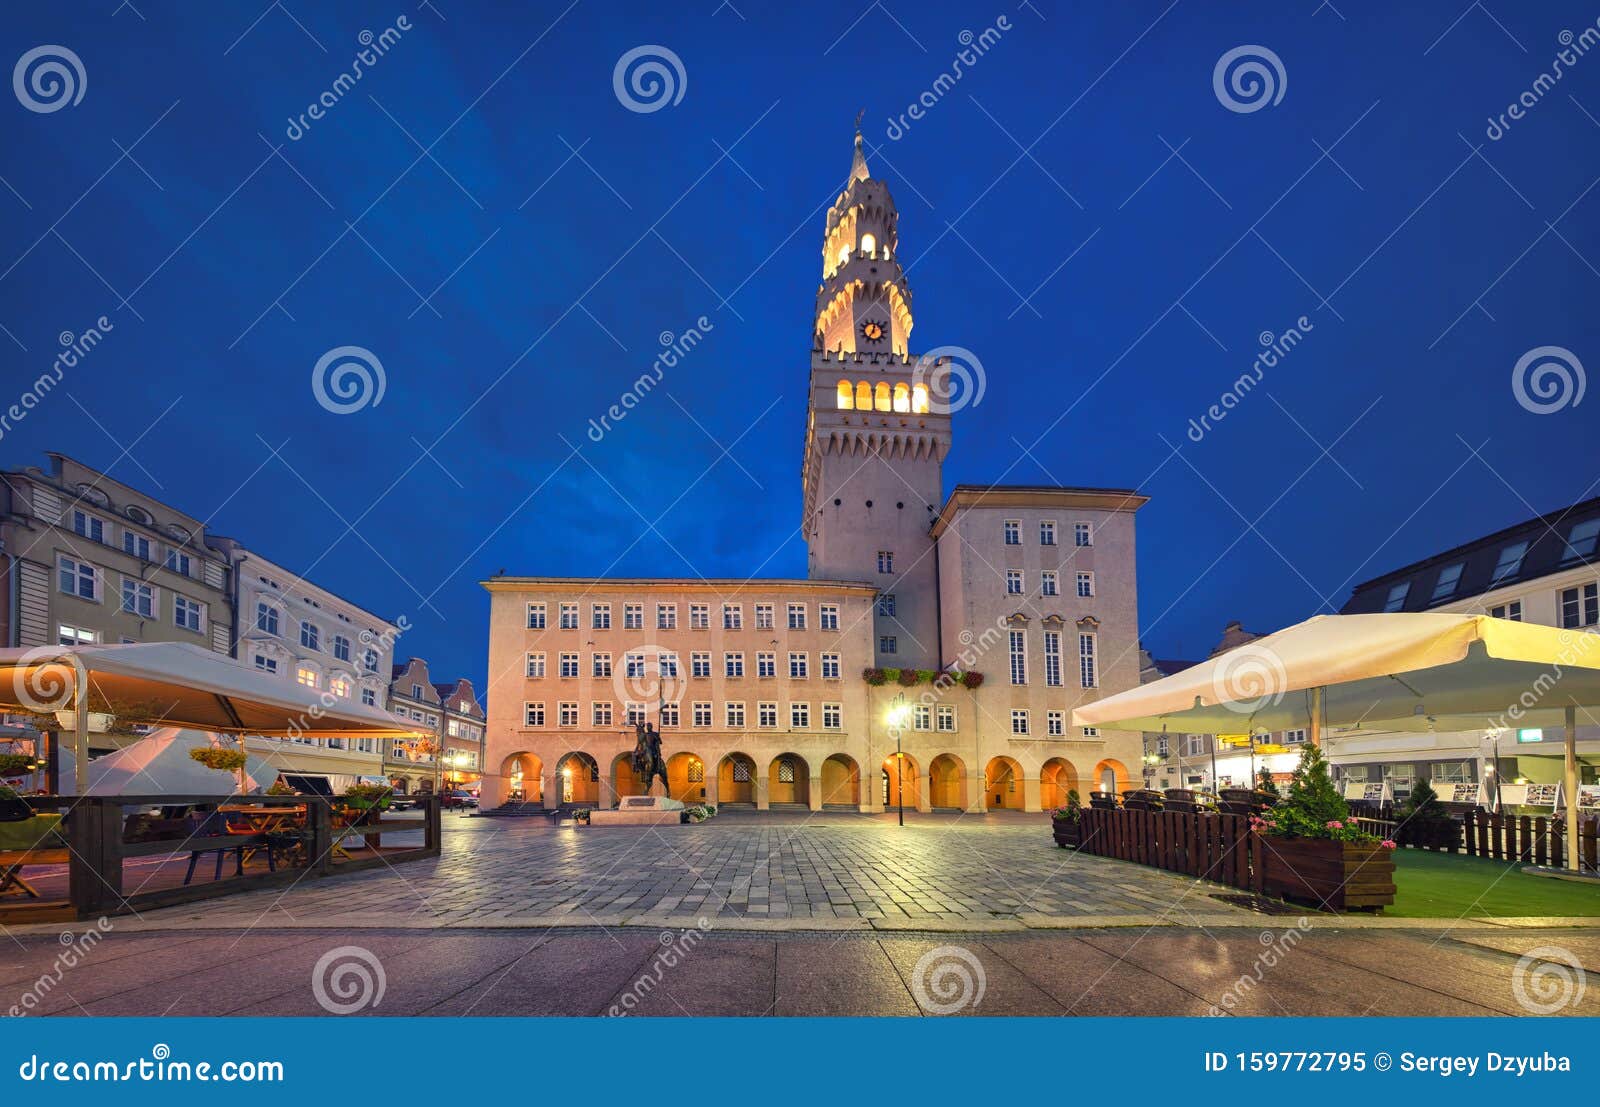 opole, poland. view of rynek square at dusk